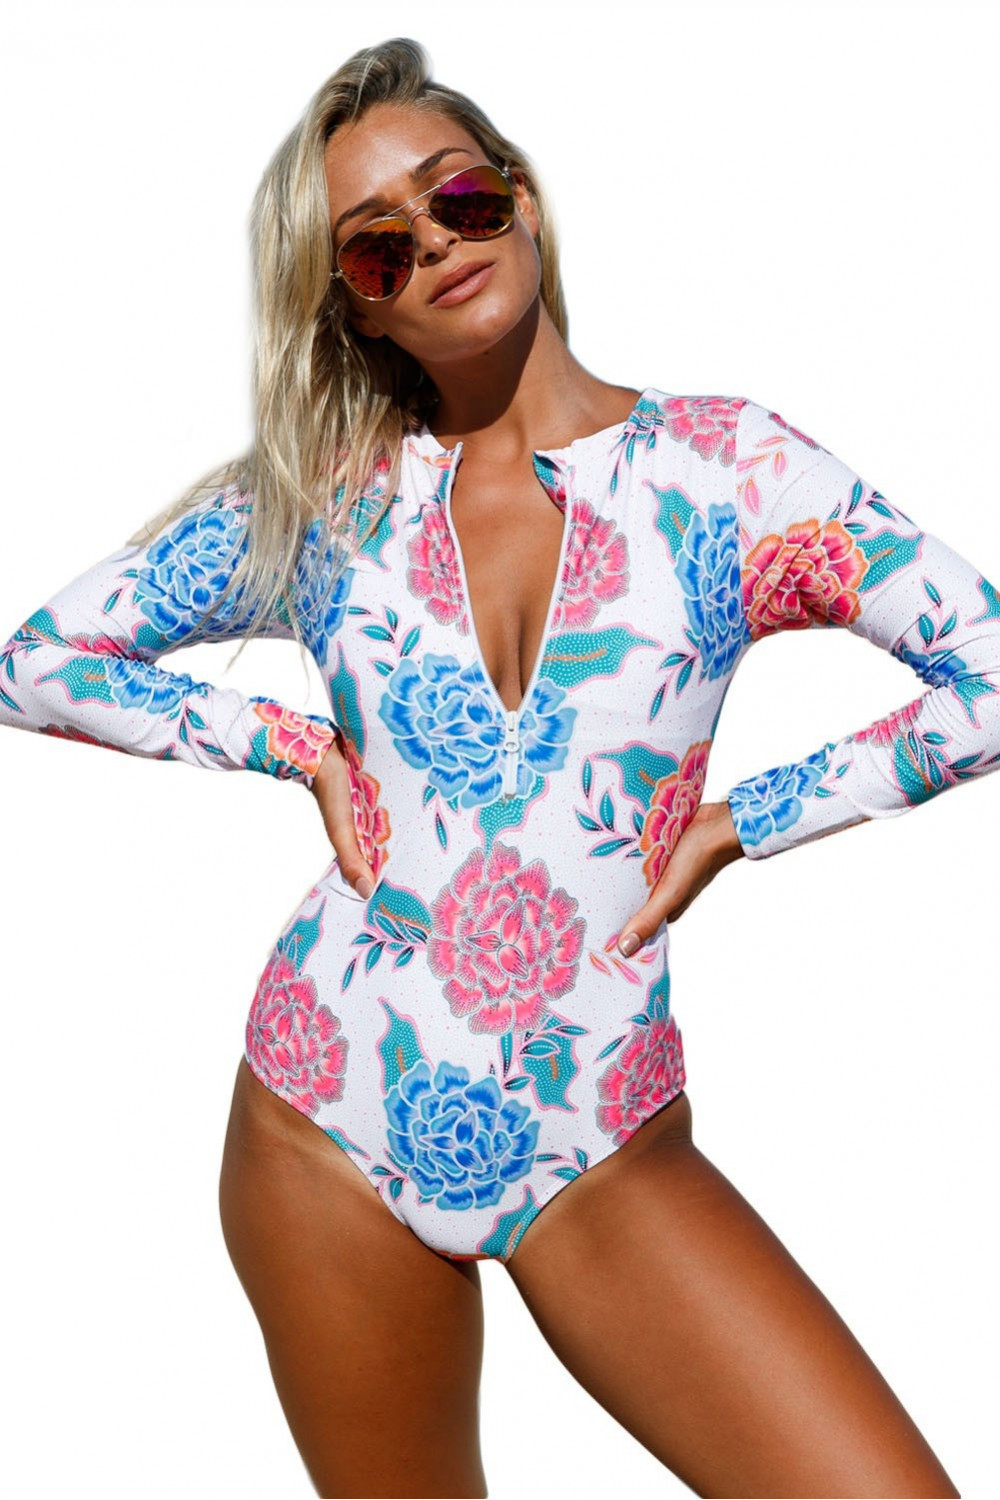 Long-sleeved one-piece swimsuit